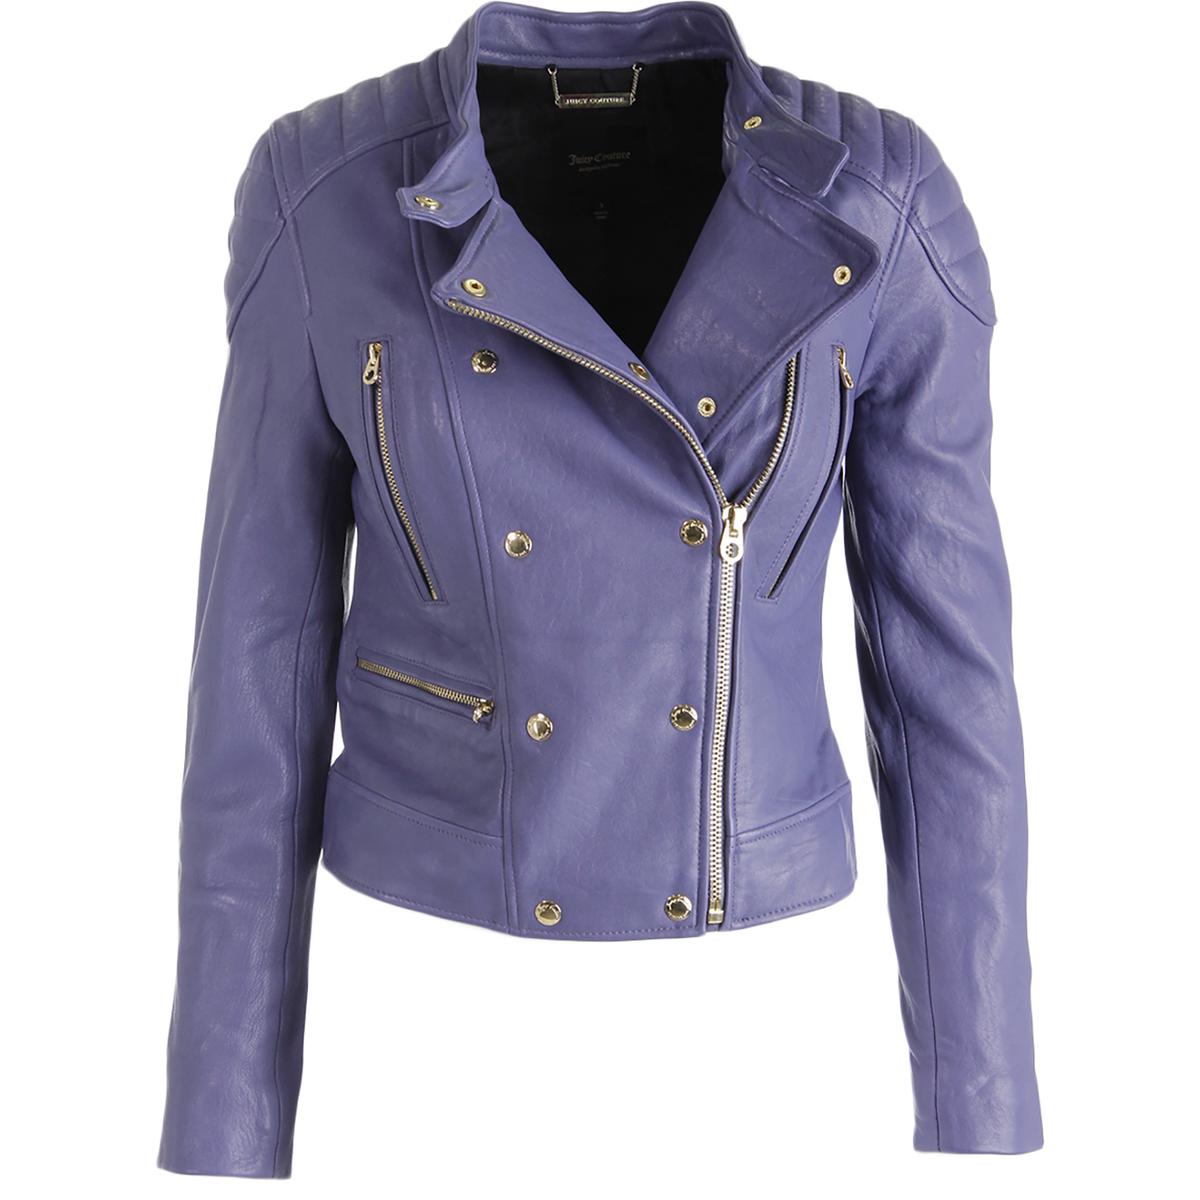 Juicy Couture Black Label 3828 Womens Leather Moto Jacket BHFO